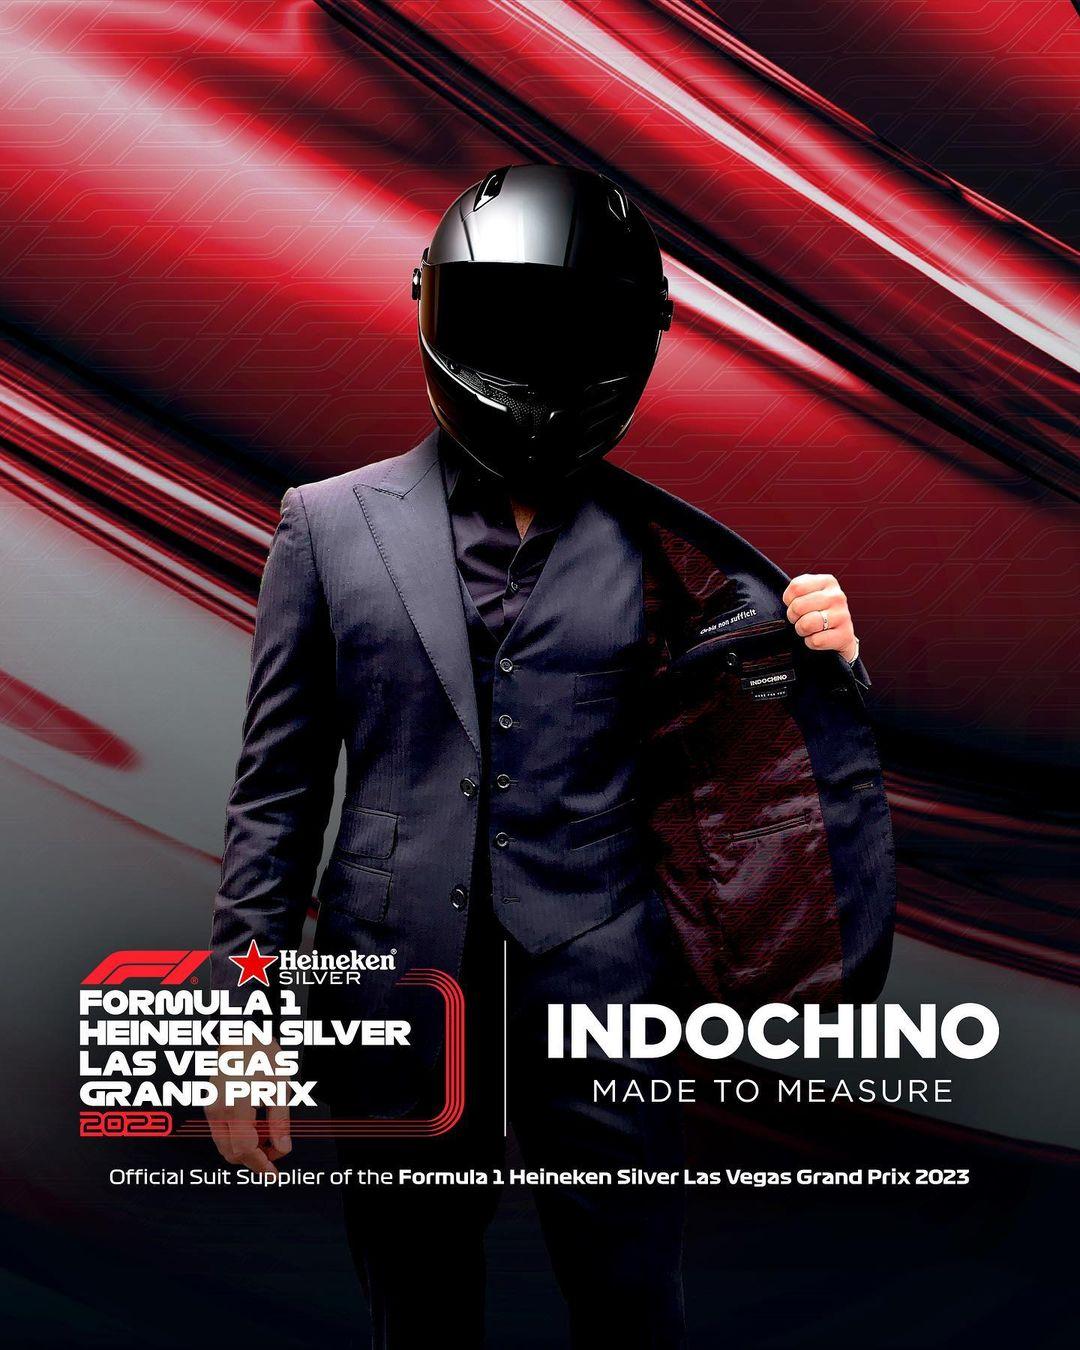 class="content__text"
 The #LasVegasGP is proud to partner with @indochino as the official suit supplier of the race! The global leader in custom suiting will create made to measure race week uniforms for the Grand Prix’s employees to spotlight #Indochino apparel at the inaugural event 👔 
 